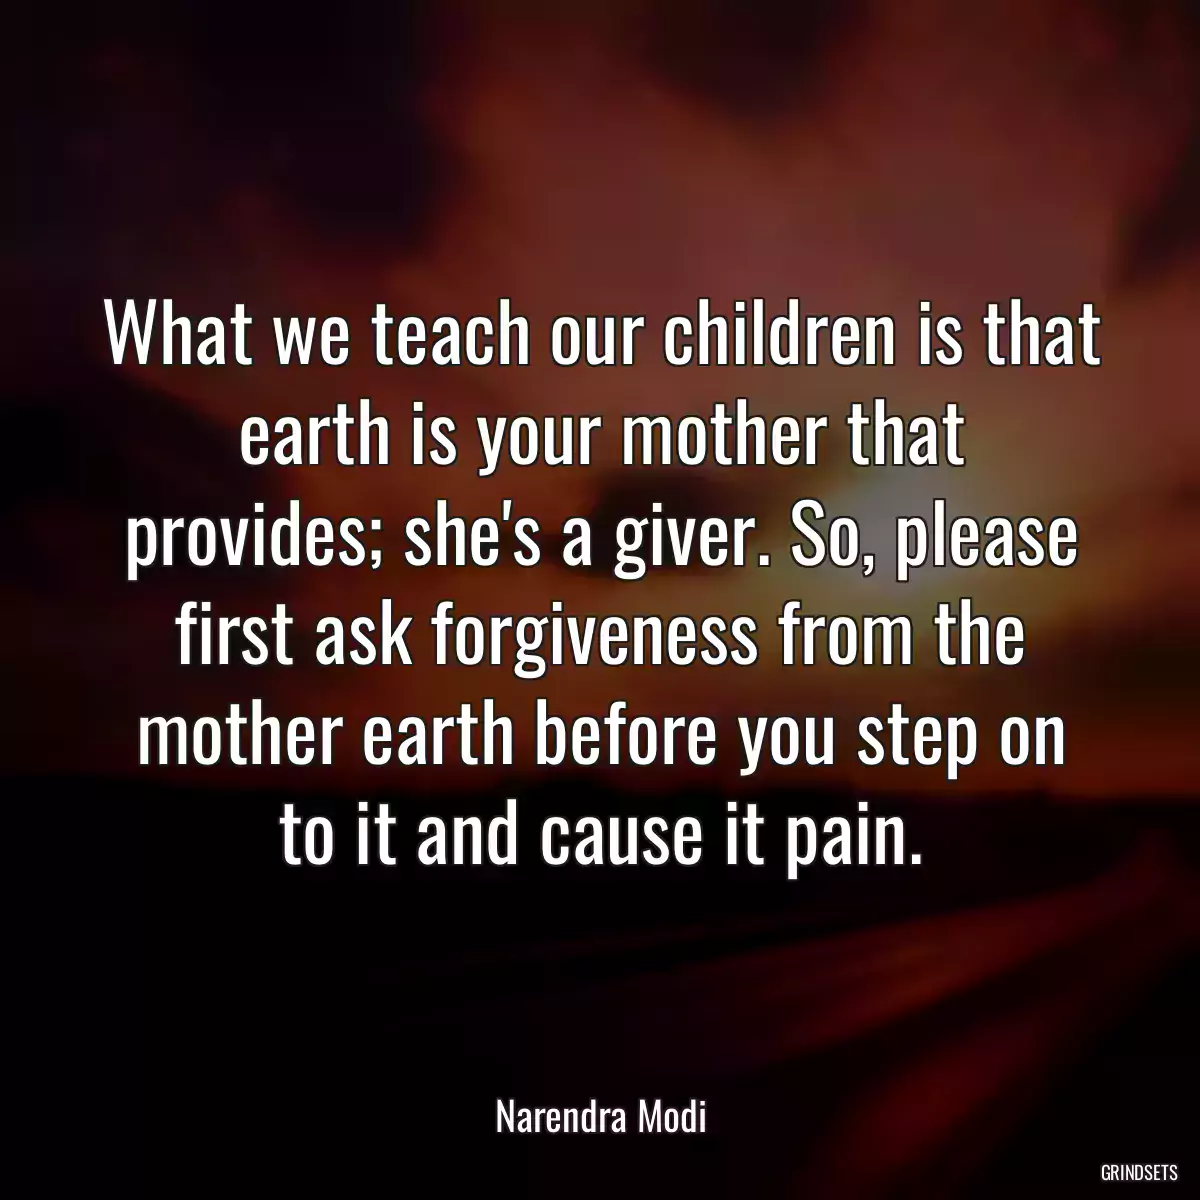 What we teach our children is that earth is your mother that provides; she\'s a giver. So, please first ask forgiveness from the mother earth before you step on to it and cause it pain.